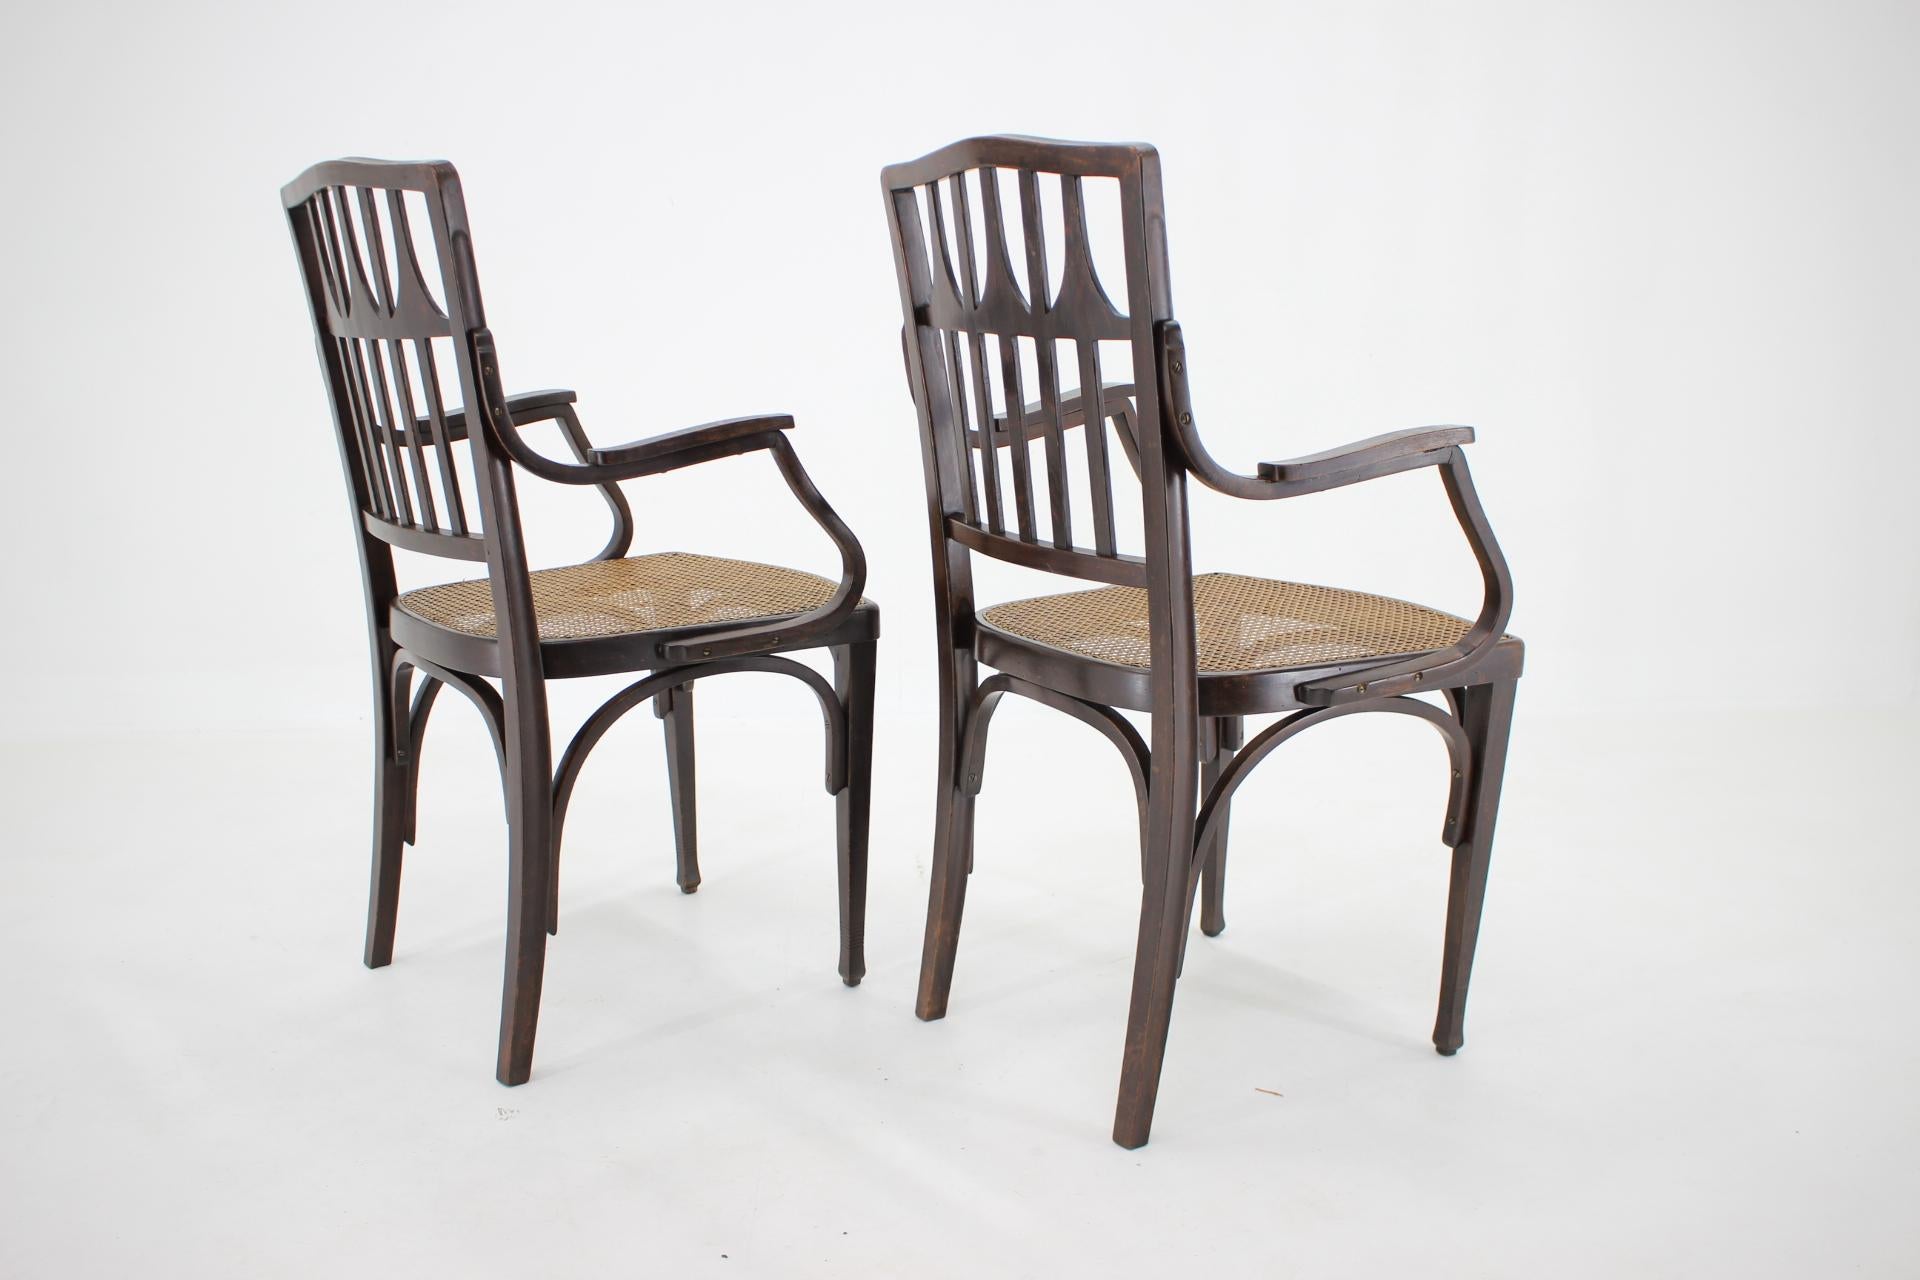 1900s Koloman Moser Pair of Armchairs for J & J Kohn No. 327 In Good Condition For Sale In Praha, CZ